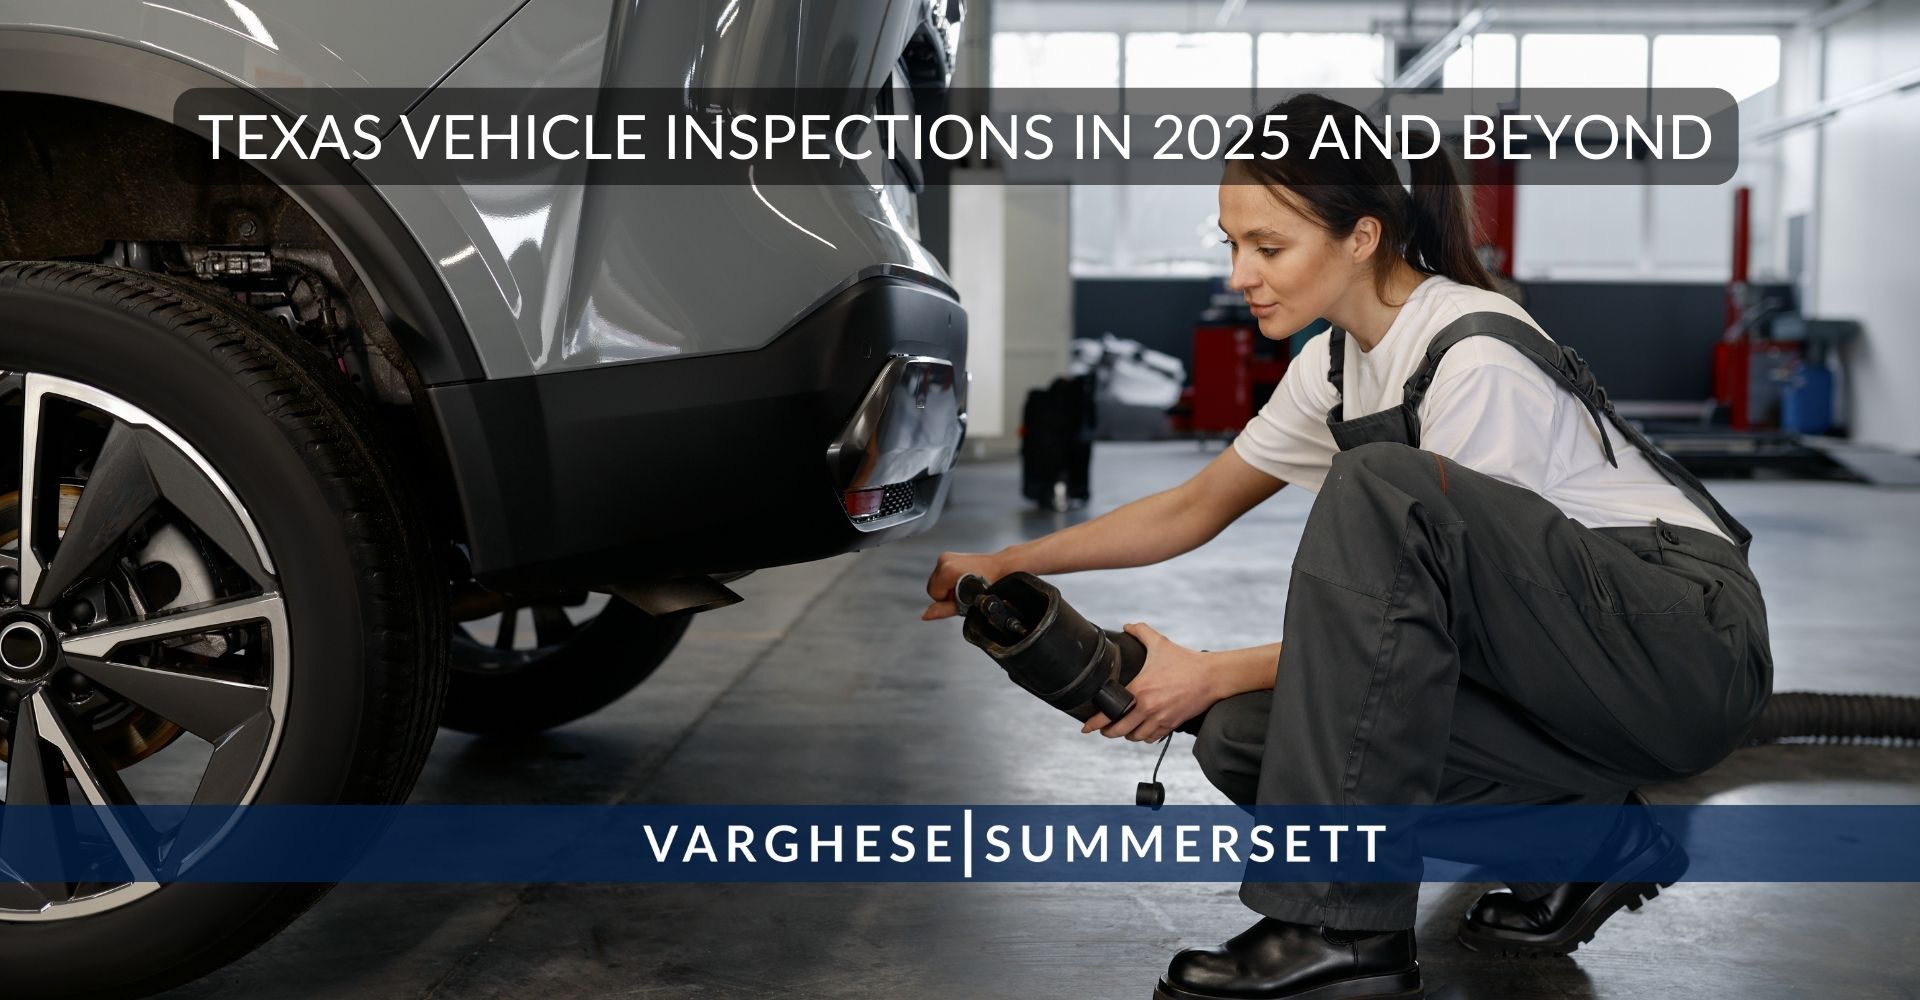 Texas Inspection Sticker Requirement Ending in 2025